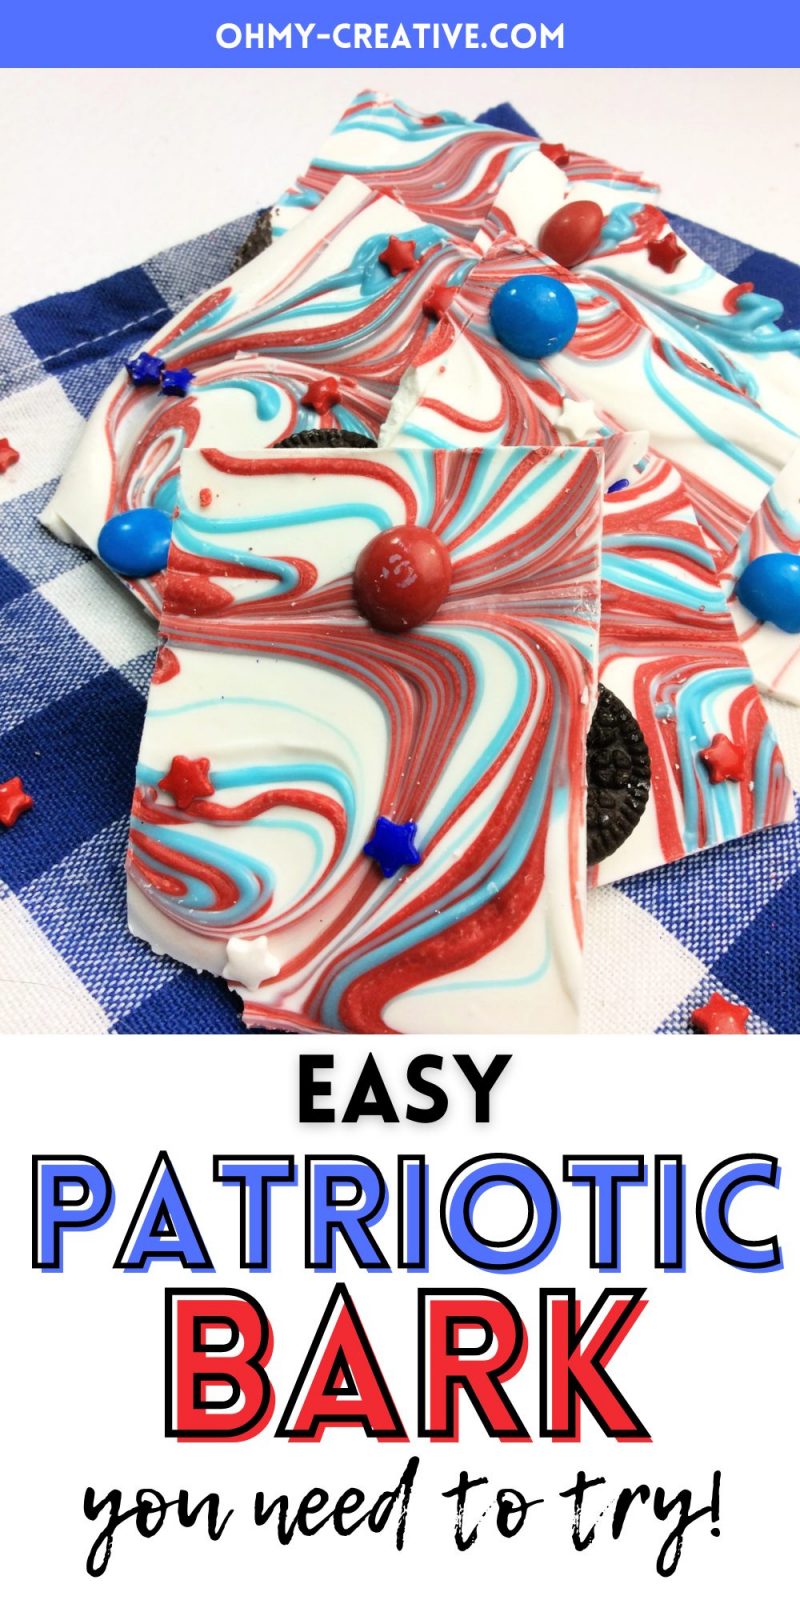 How To Make Candy Bark: Red, White & Blue